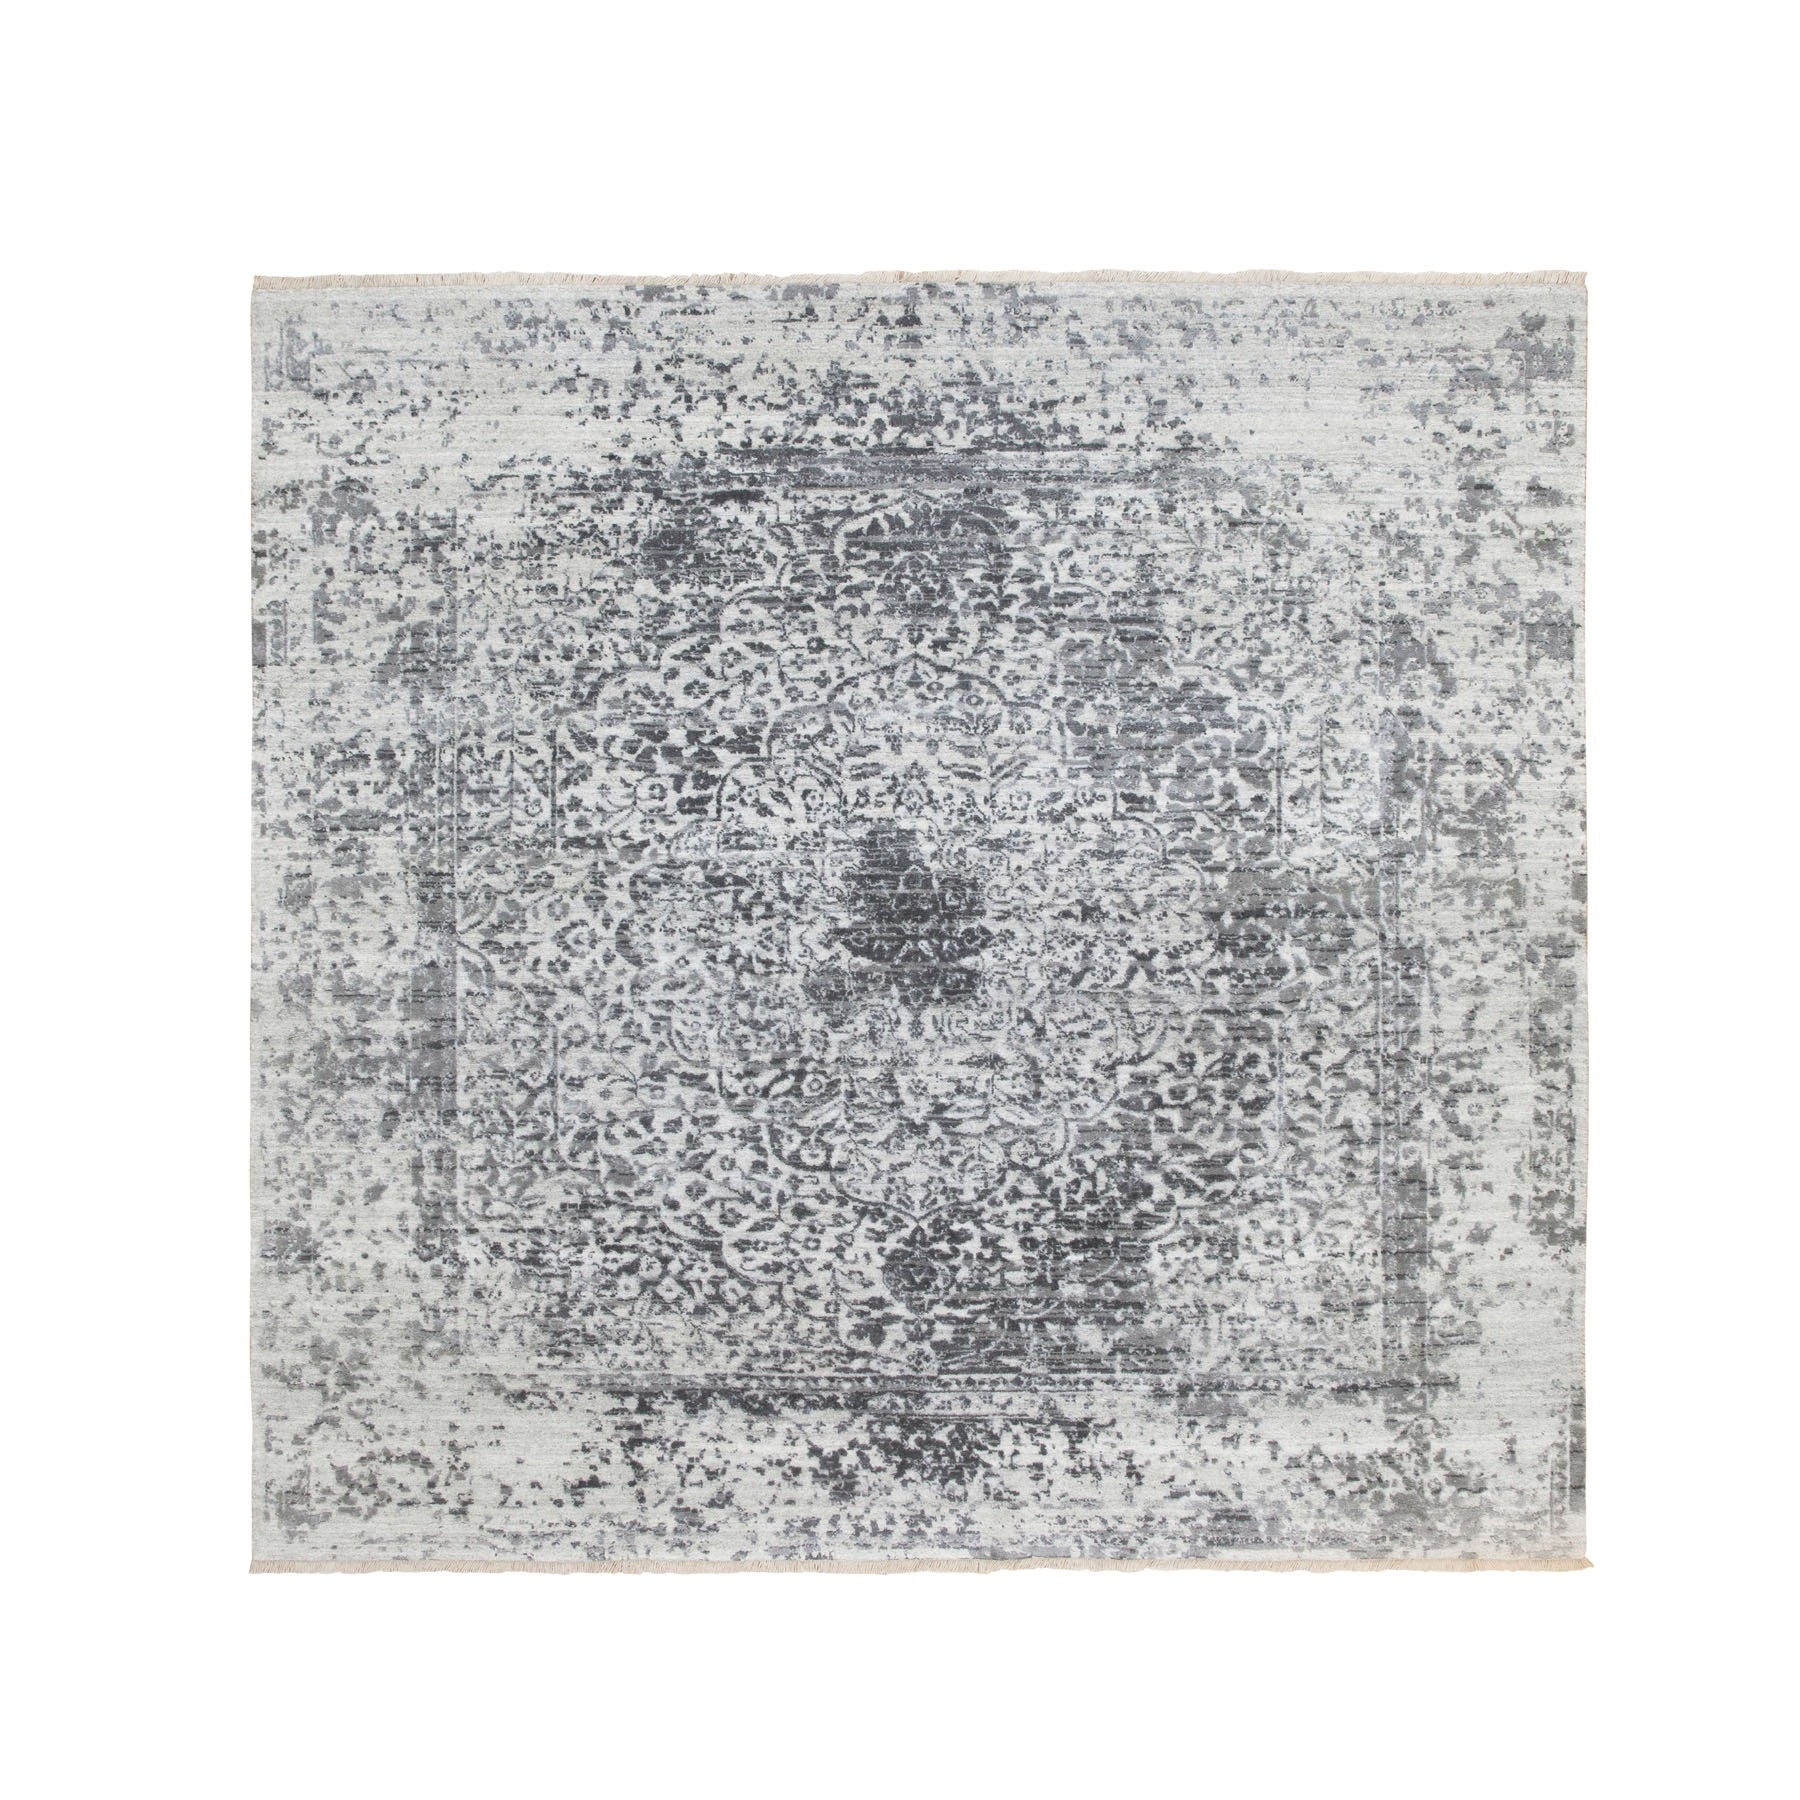 Hand Knotted Transitional Area Rug > Design# CCSR58407 > Size: 6'-2" x 6'-2"